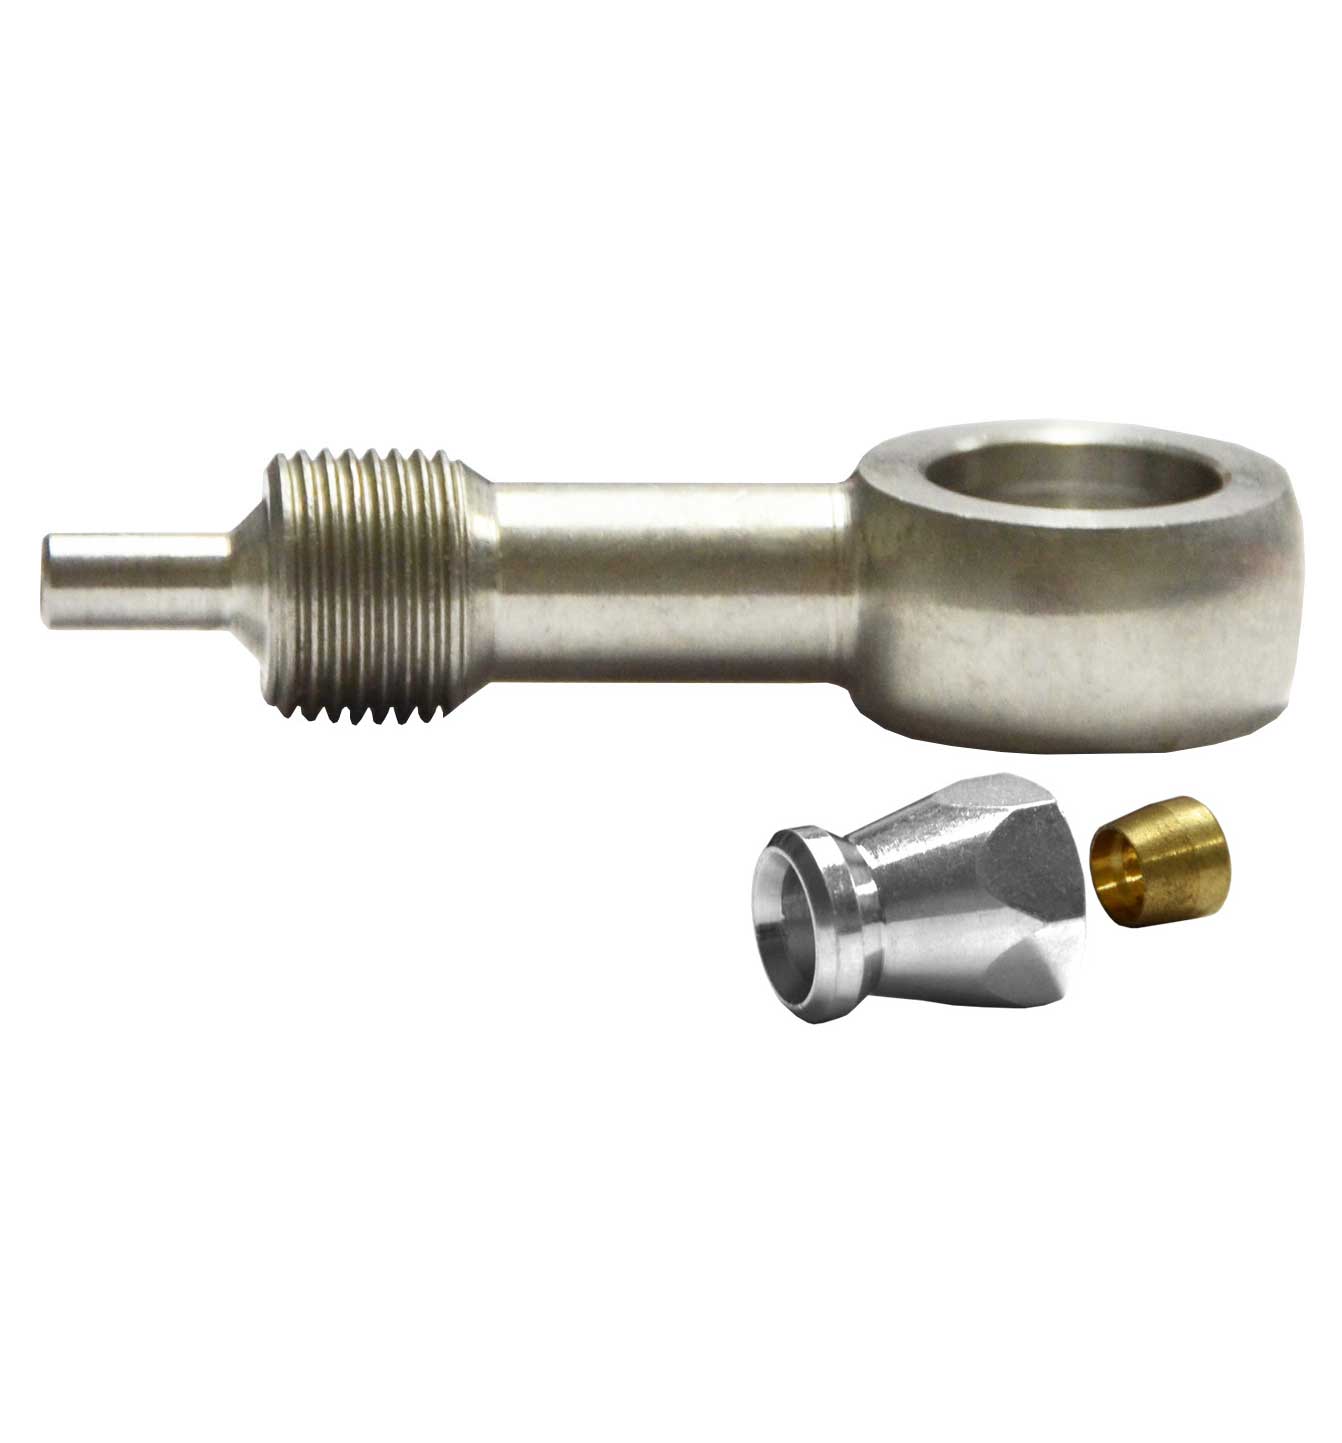 7/16" Banjo Fitting for AN-3 (3/16") - Straight Zinc Plated